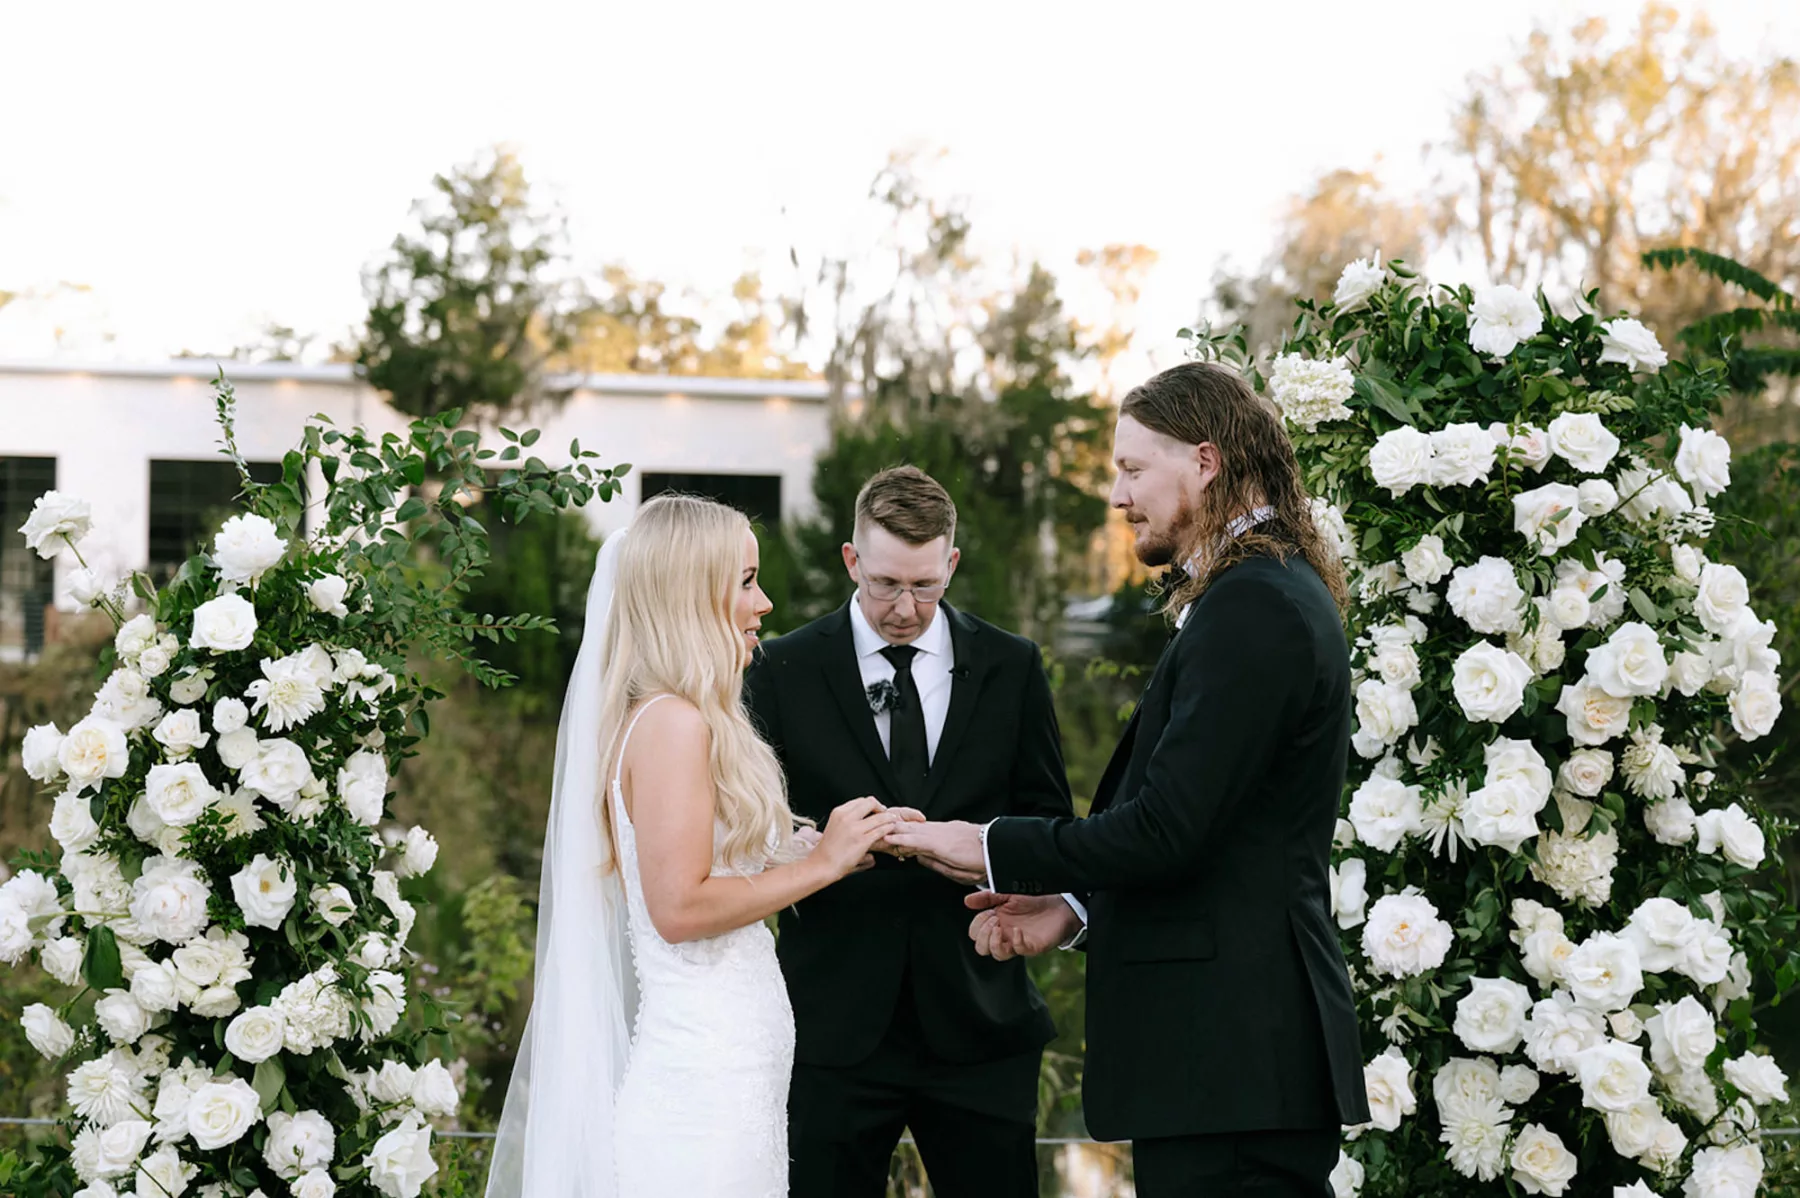 Bride and Groom Wedding Vow Exchange | Asymmetrical Floral Arbor with White Roses and Greenery Ideas | Tampa Bay Florist Bloom Shakalaka | Event Planner Kelci Leigh Events